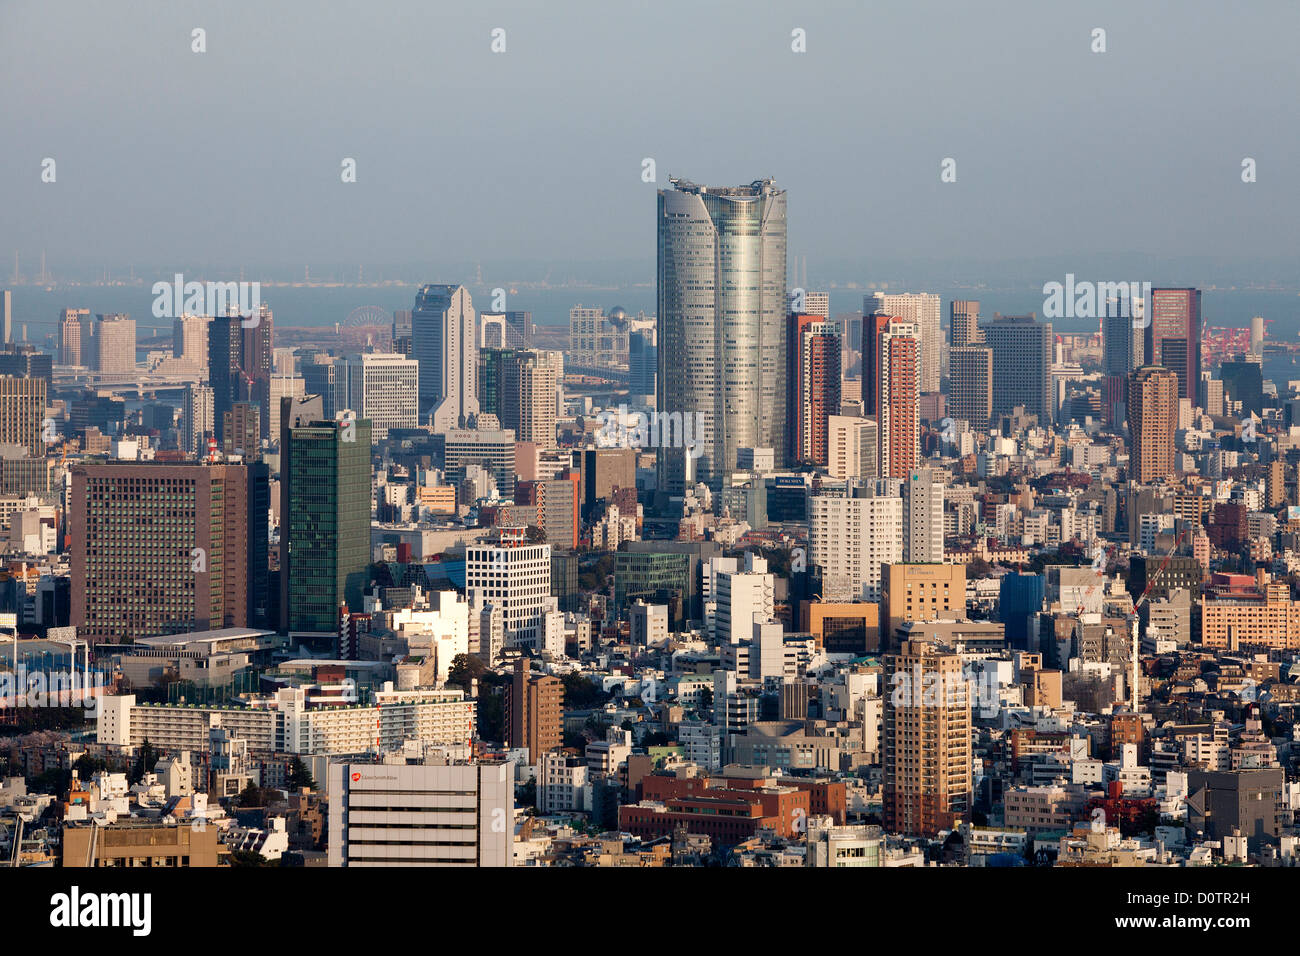 Japan, Asia, holiday, travel, Tokyo, City, downtown, skyline, buildings, roofs, overview Stock Photo